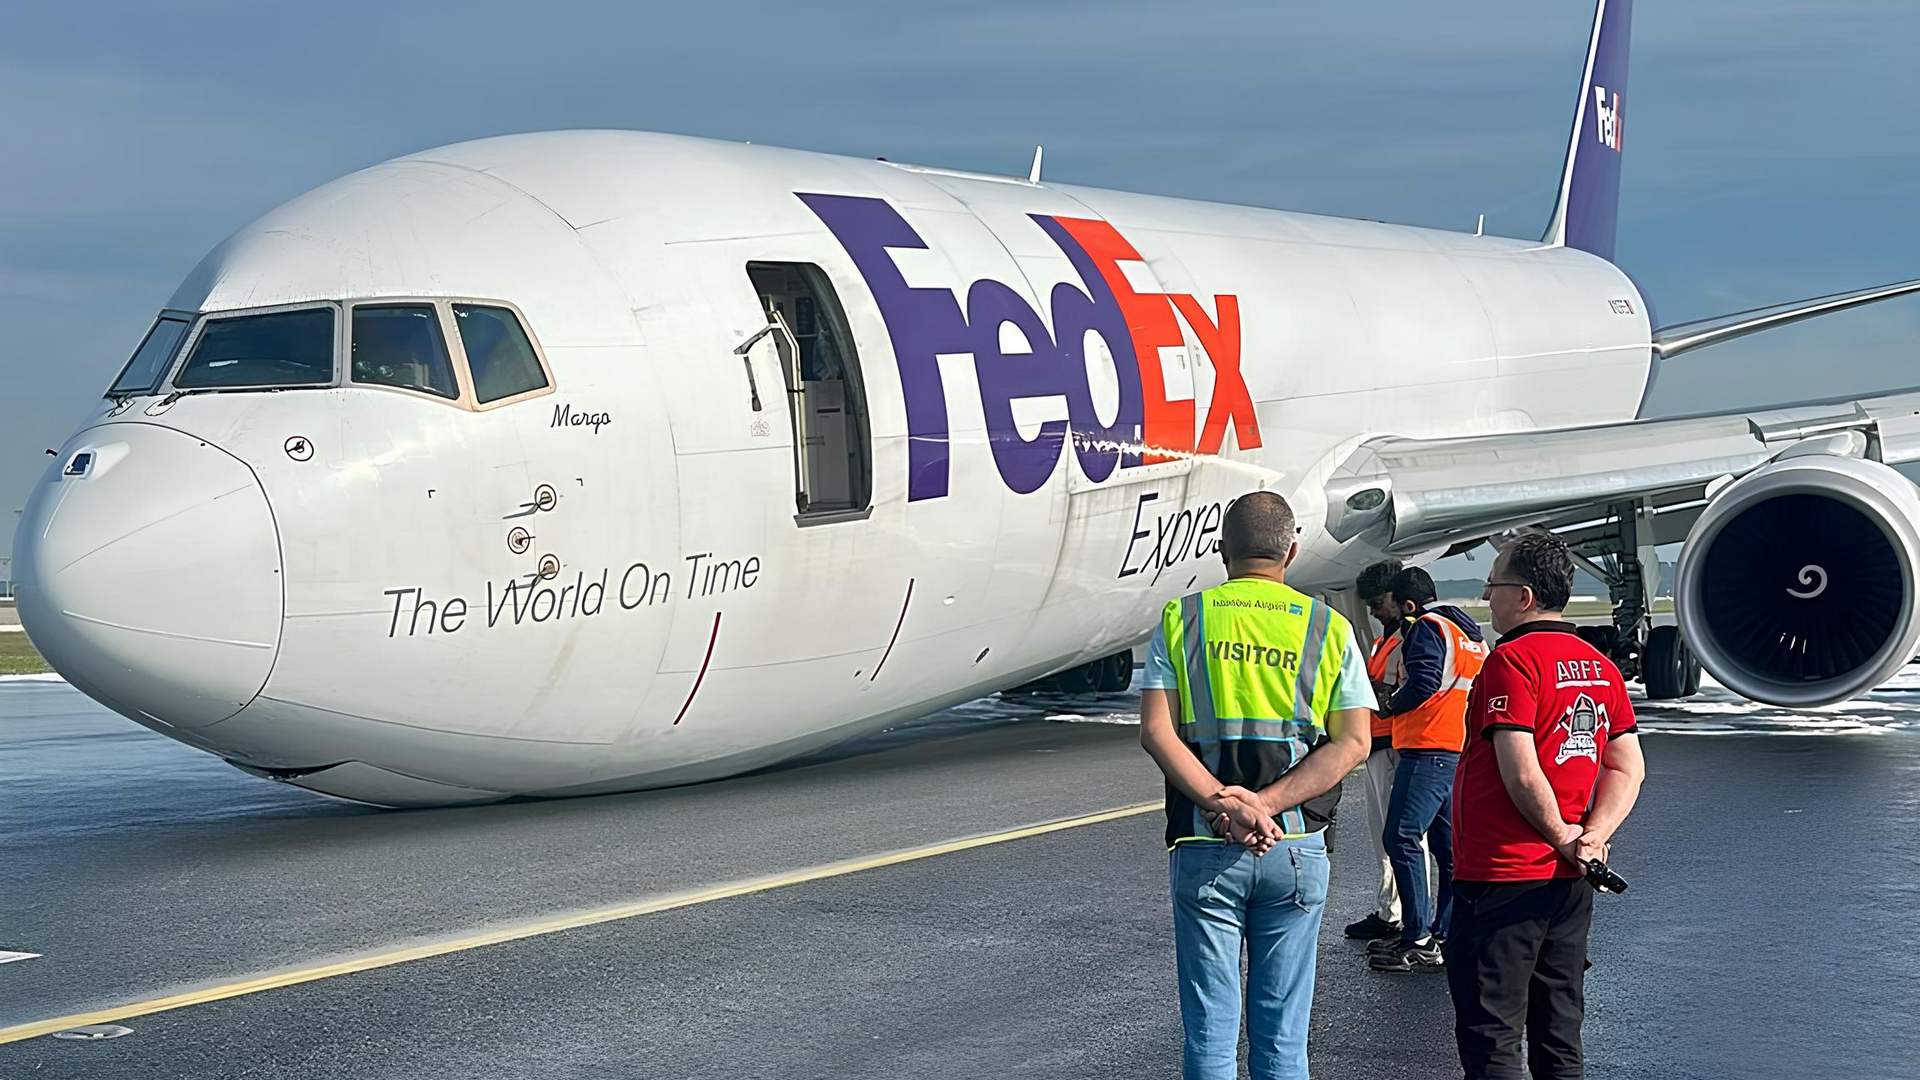 ACCIDENT: FedEx 767 Lands With Retracted Nose Gear